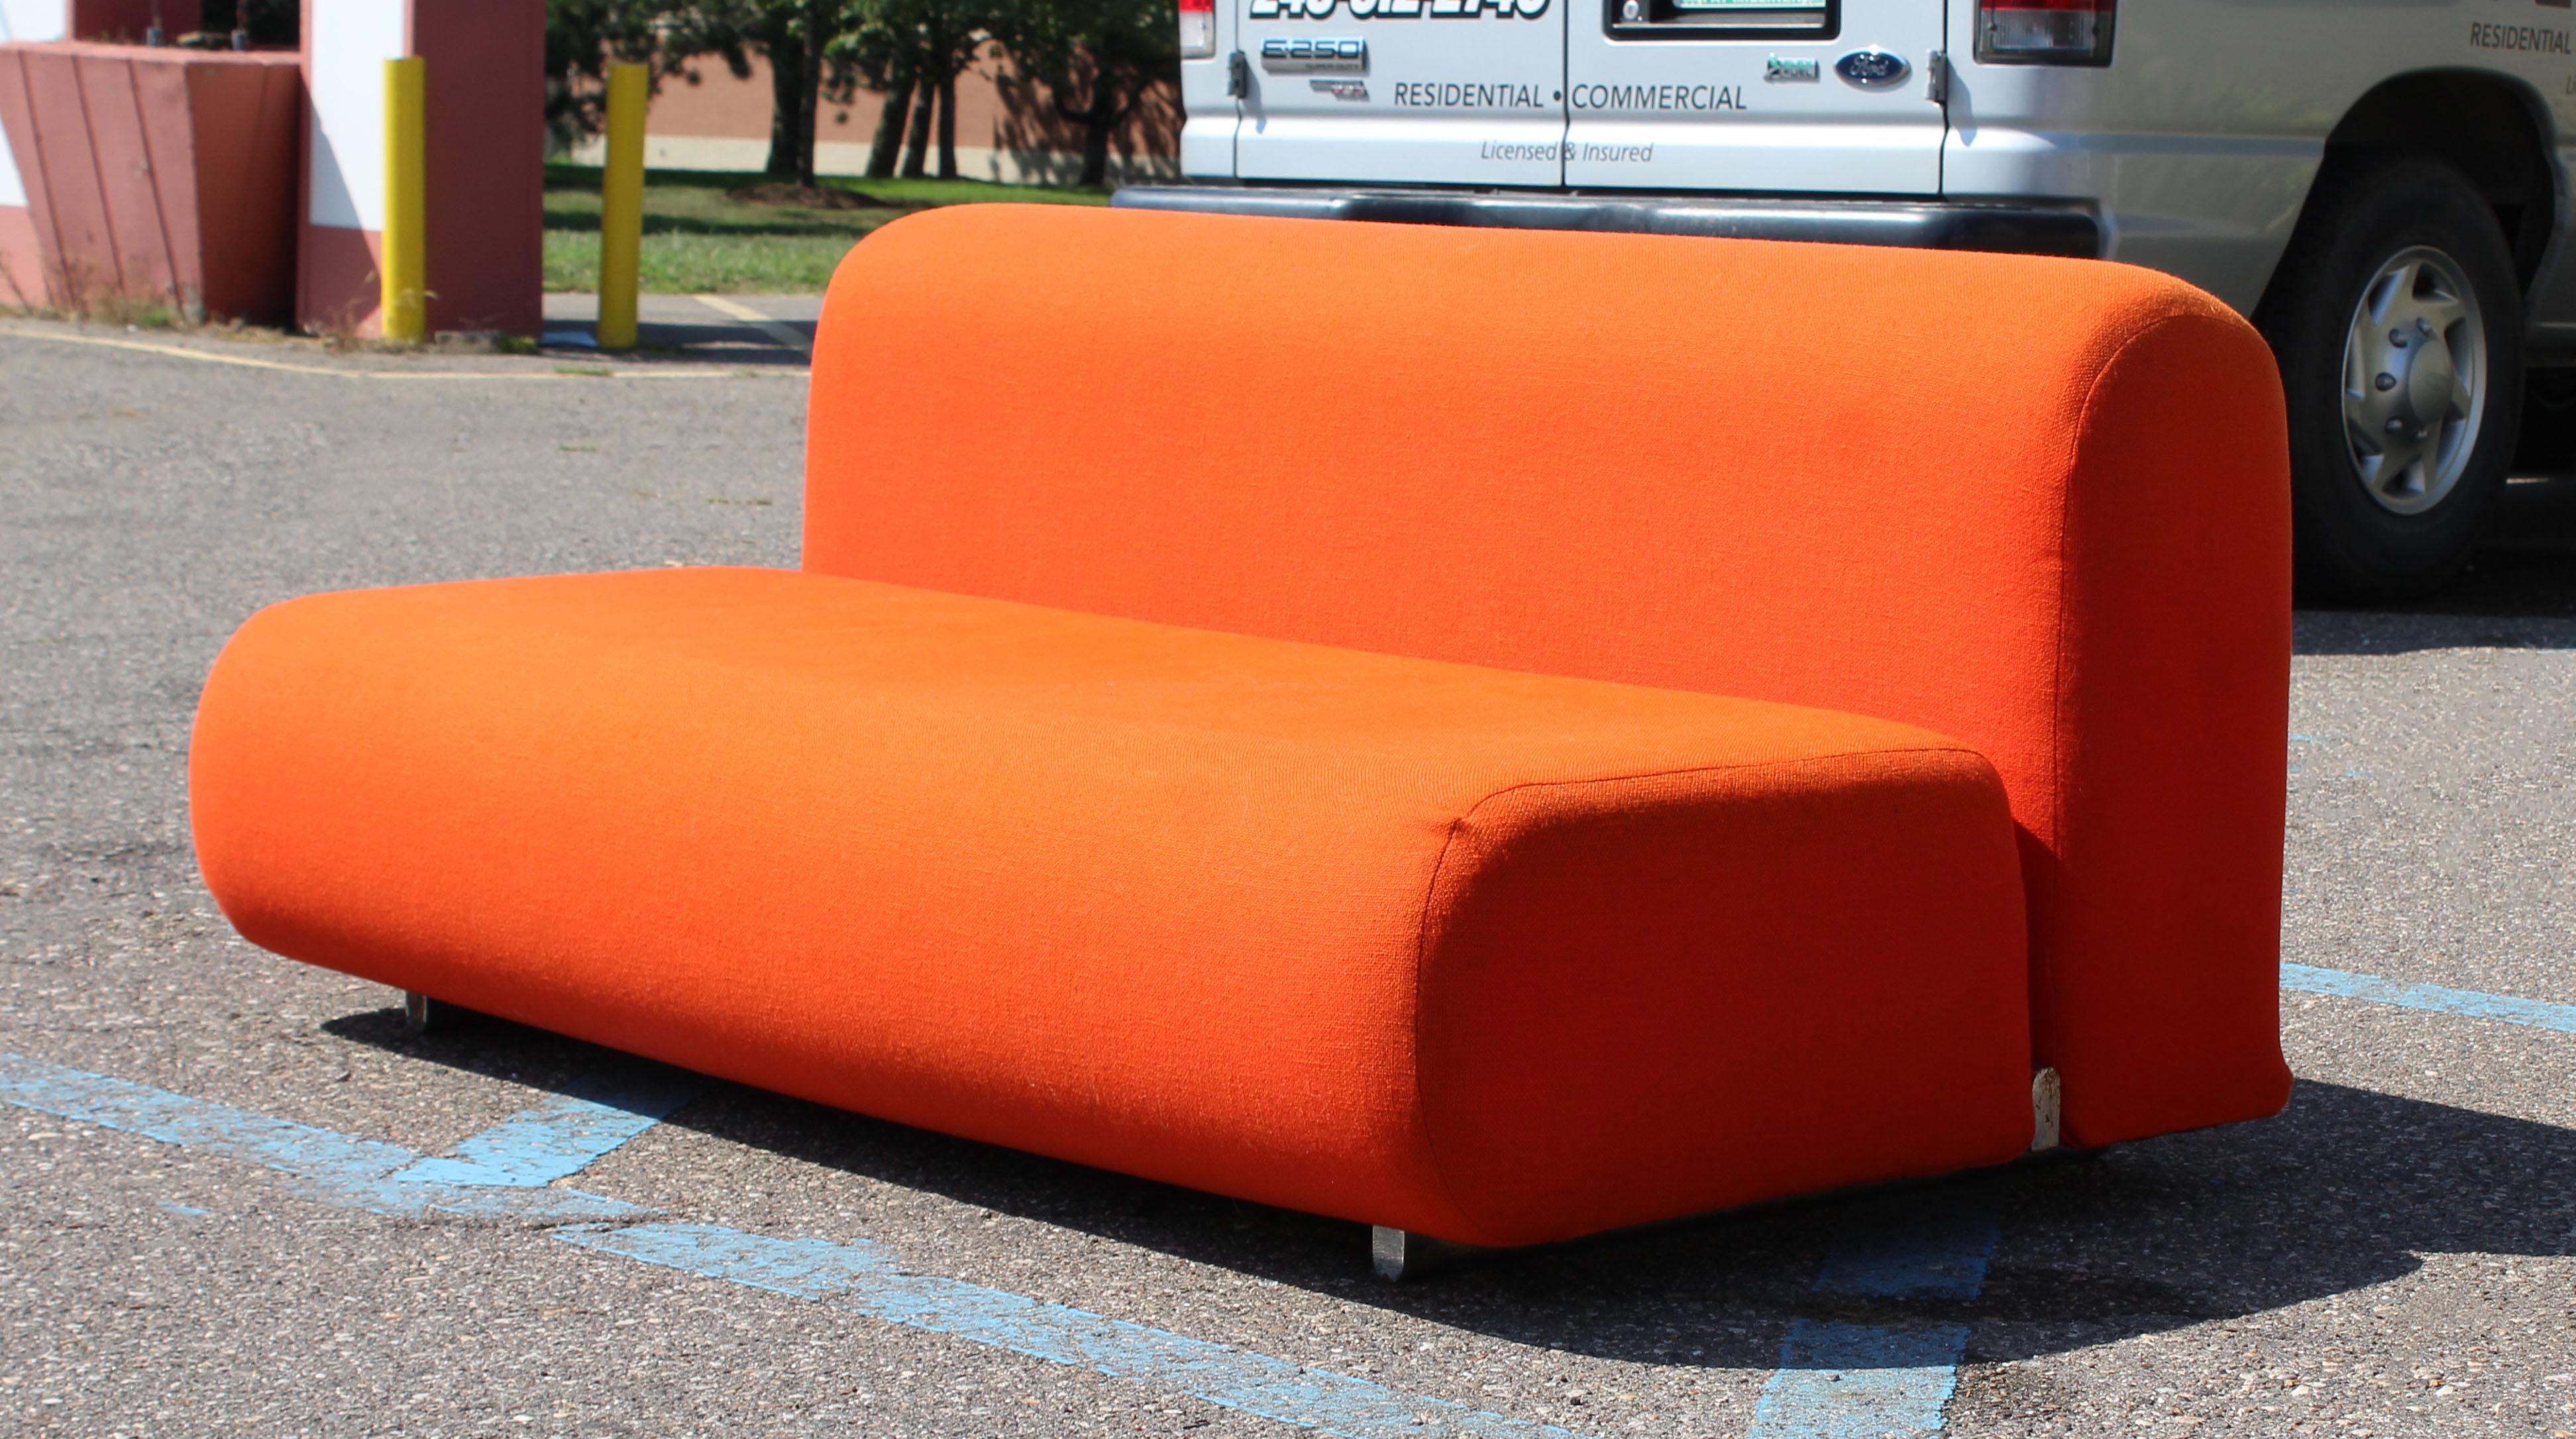 For your consideration is a gorgeous, Knoll sofa/ loveseat with an orange fabric and chrome base, circa the 1970s. In good vintage condition. Knoll Kazuhide Takahama Suzanne Settee or Loveseat. The dimensions are 58